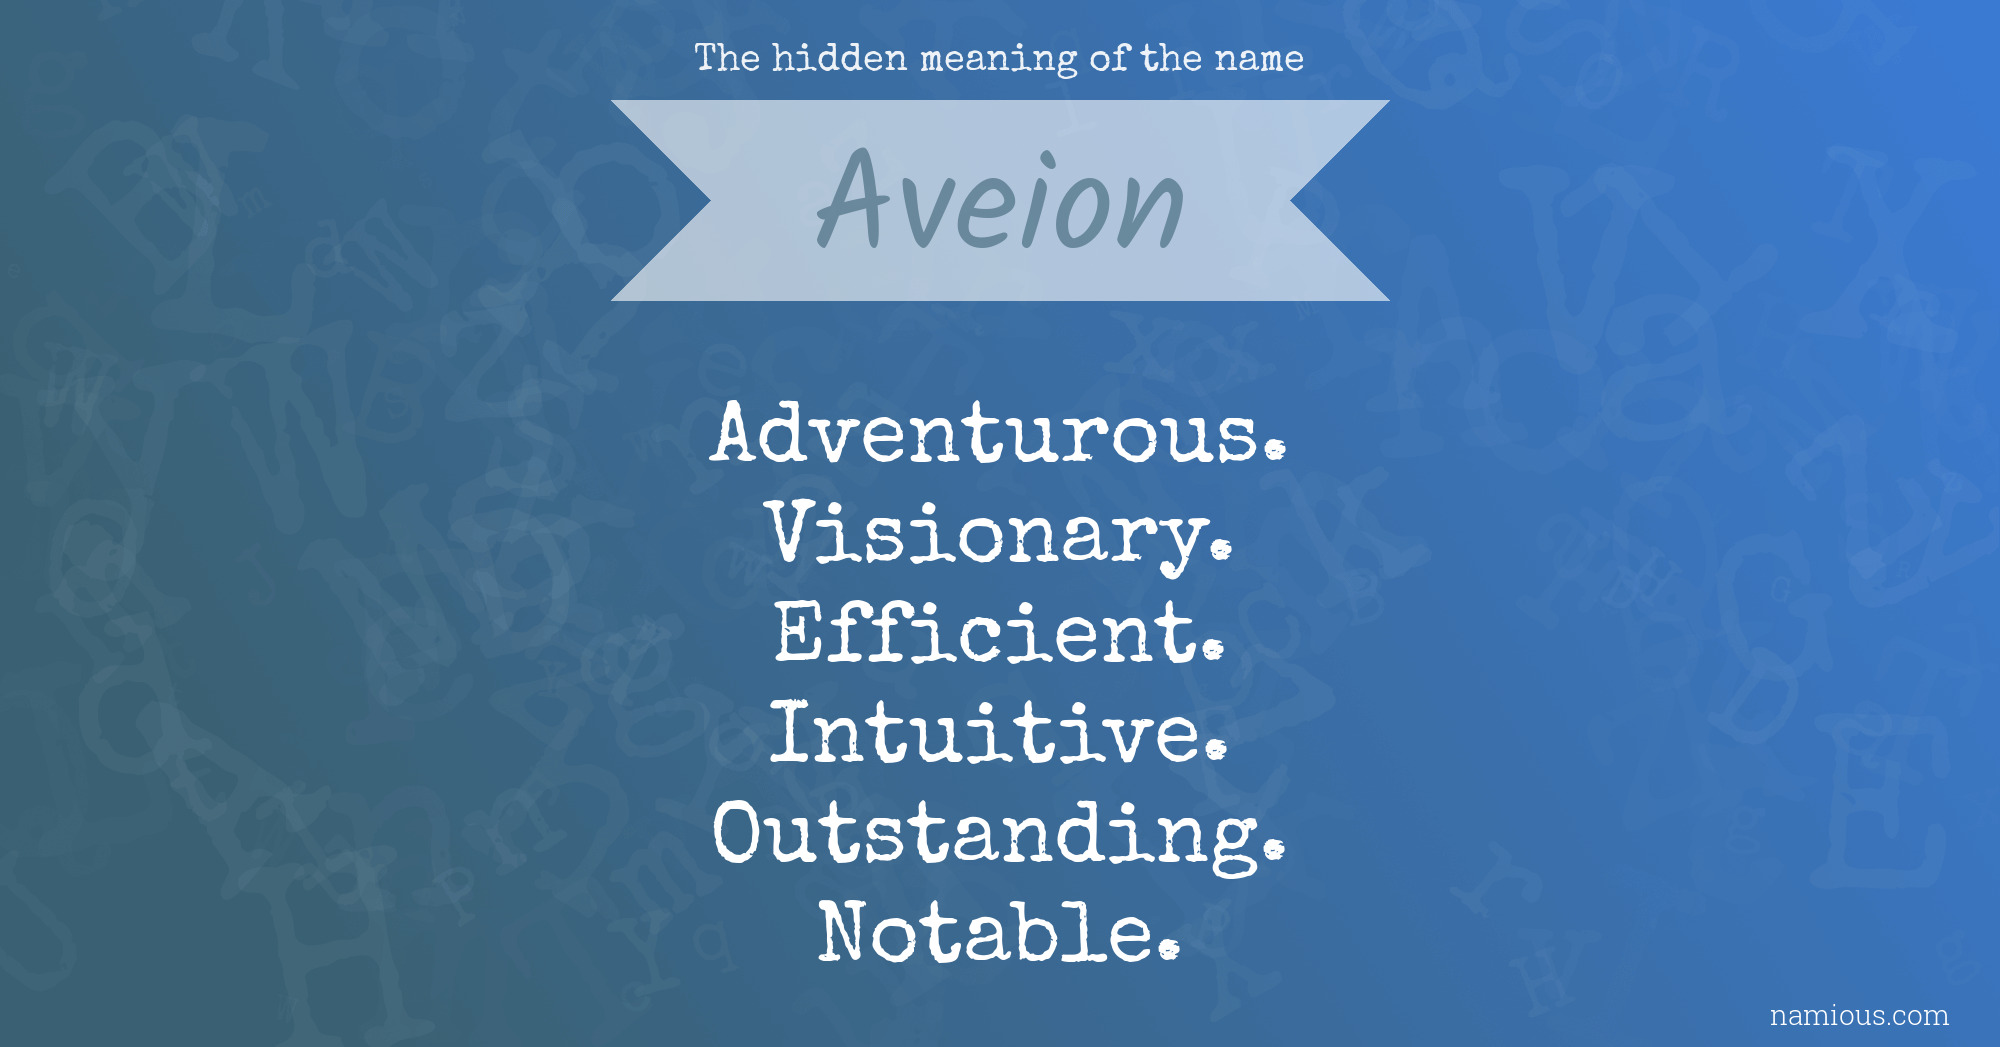 The hidden meaning of the name Aveion